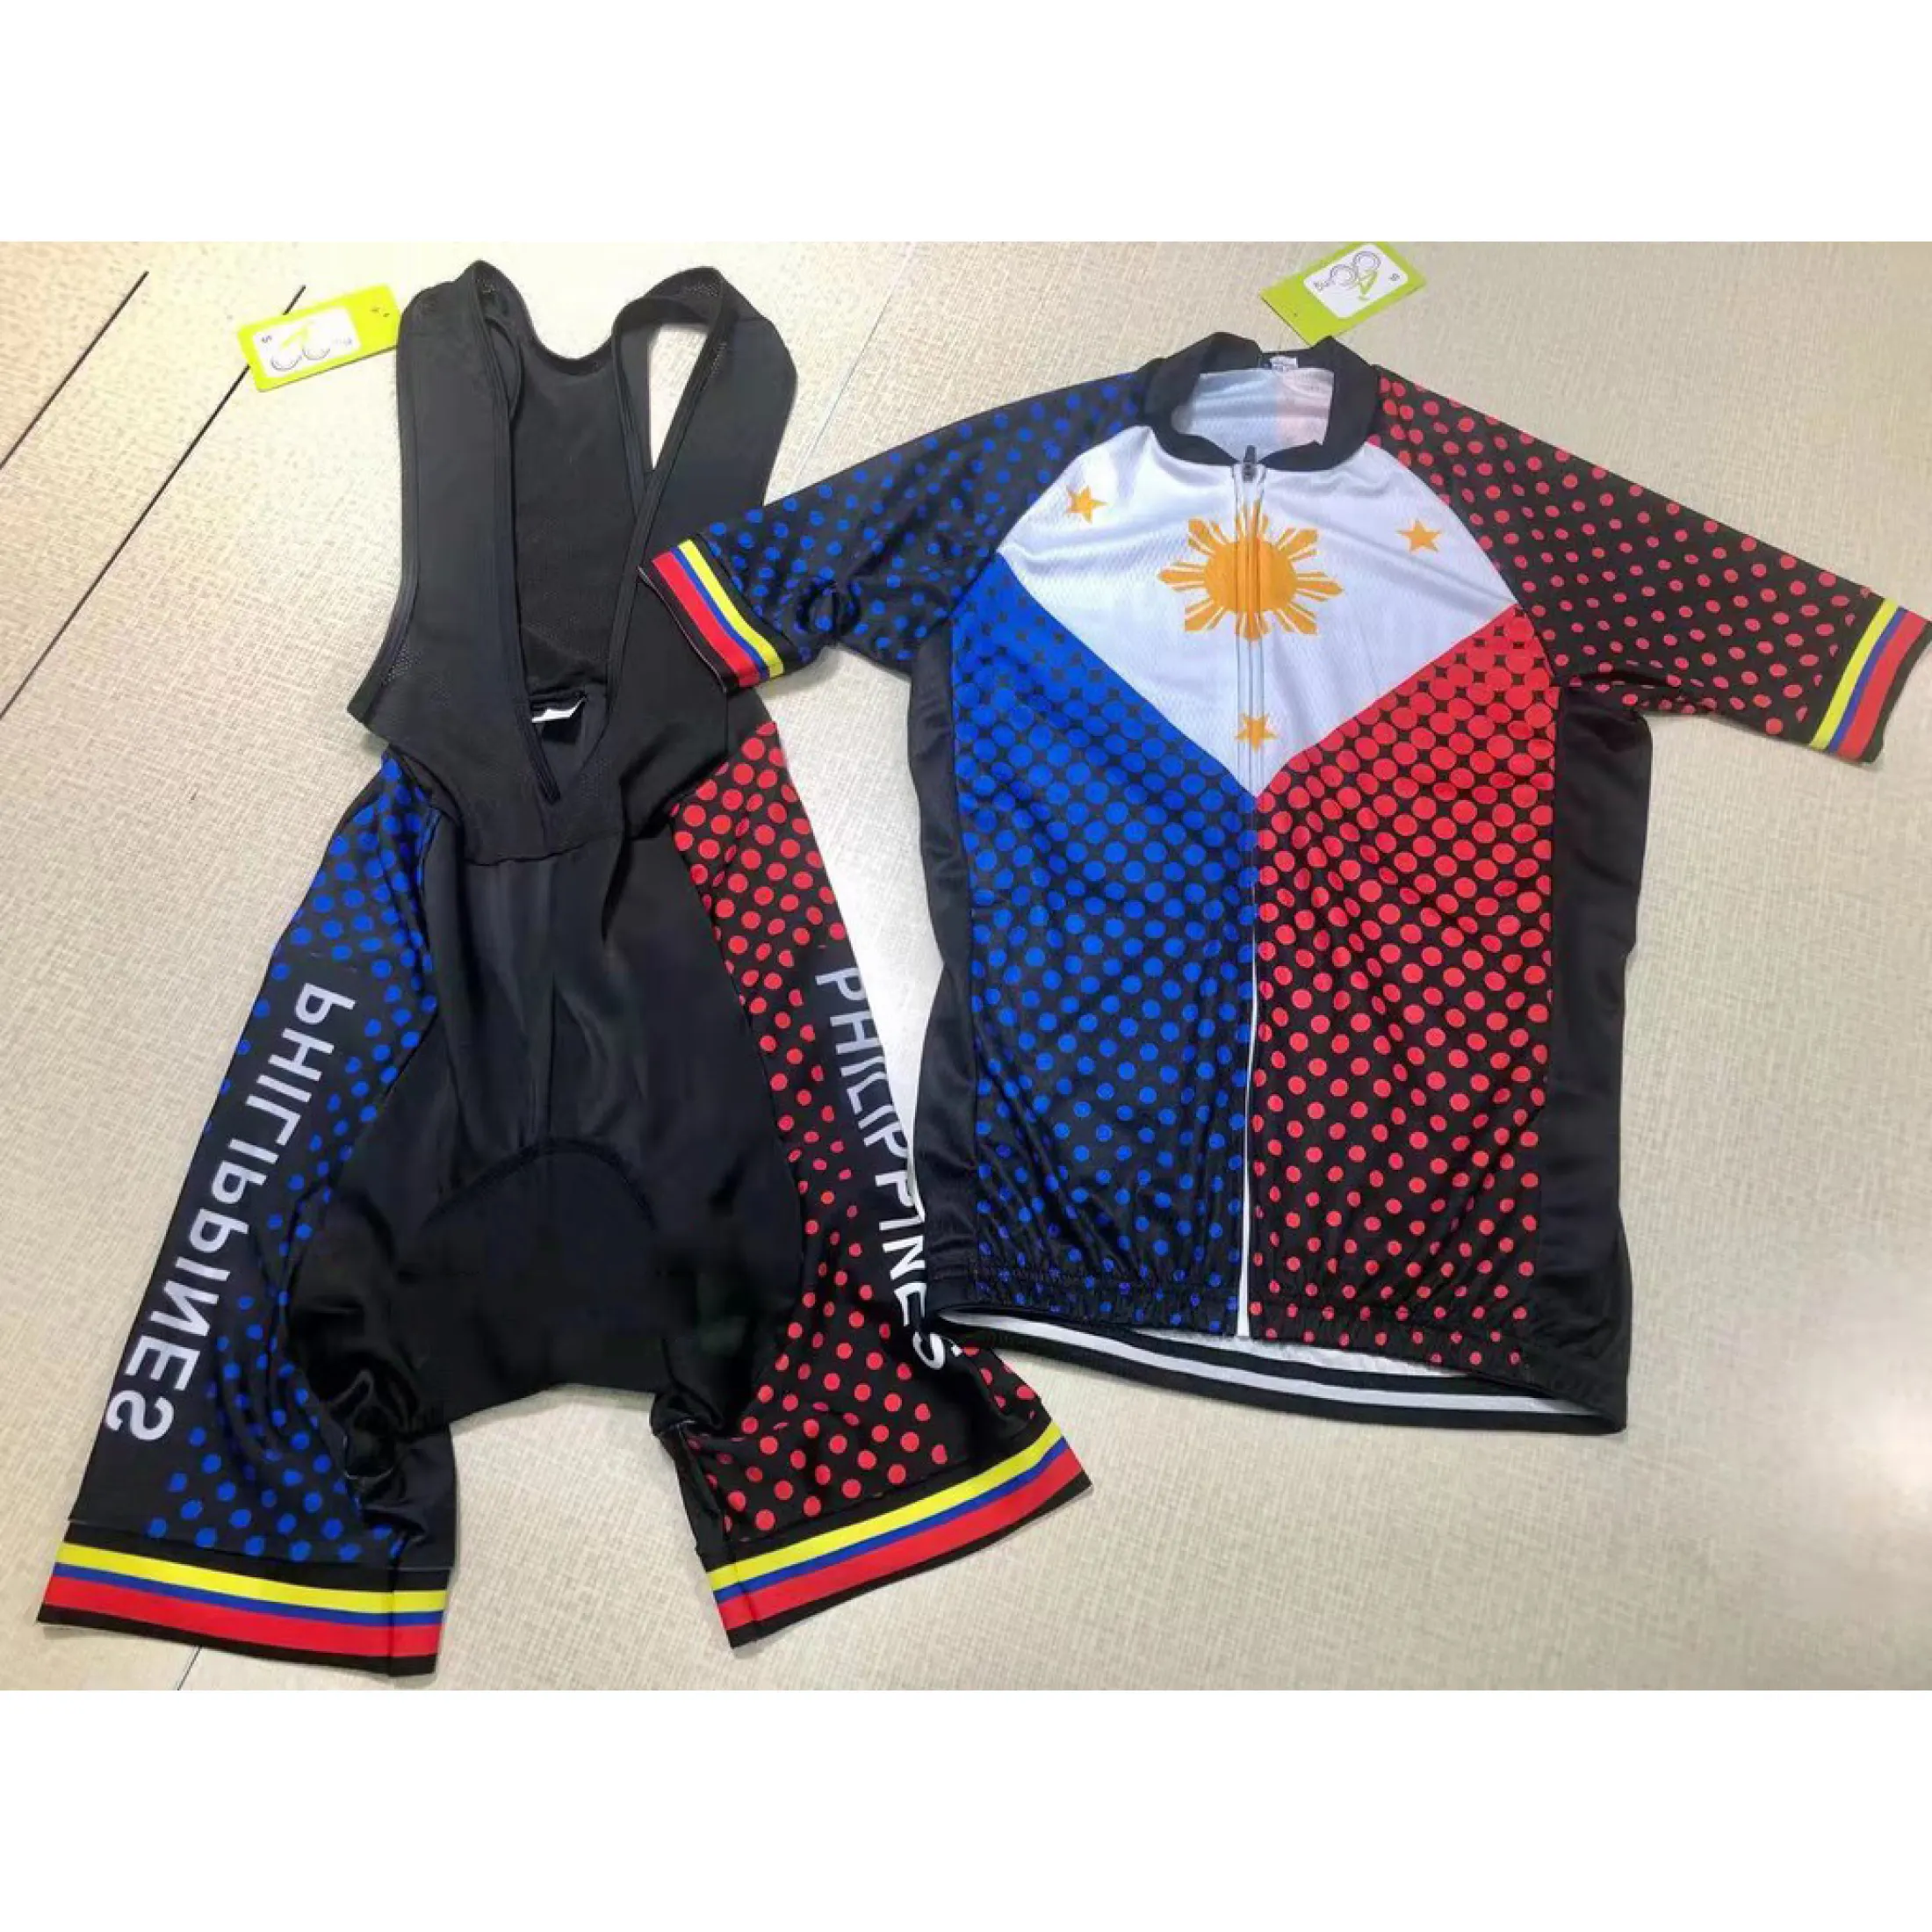 cycling jersey sales